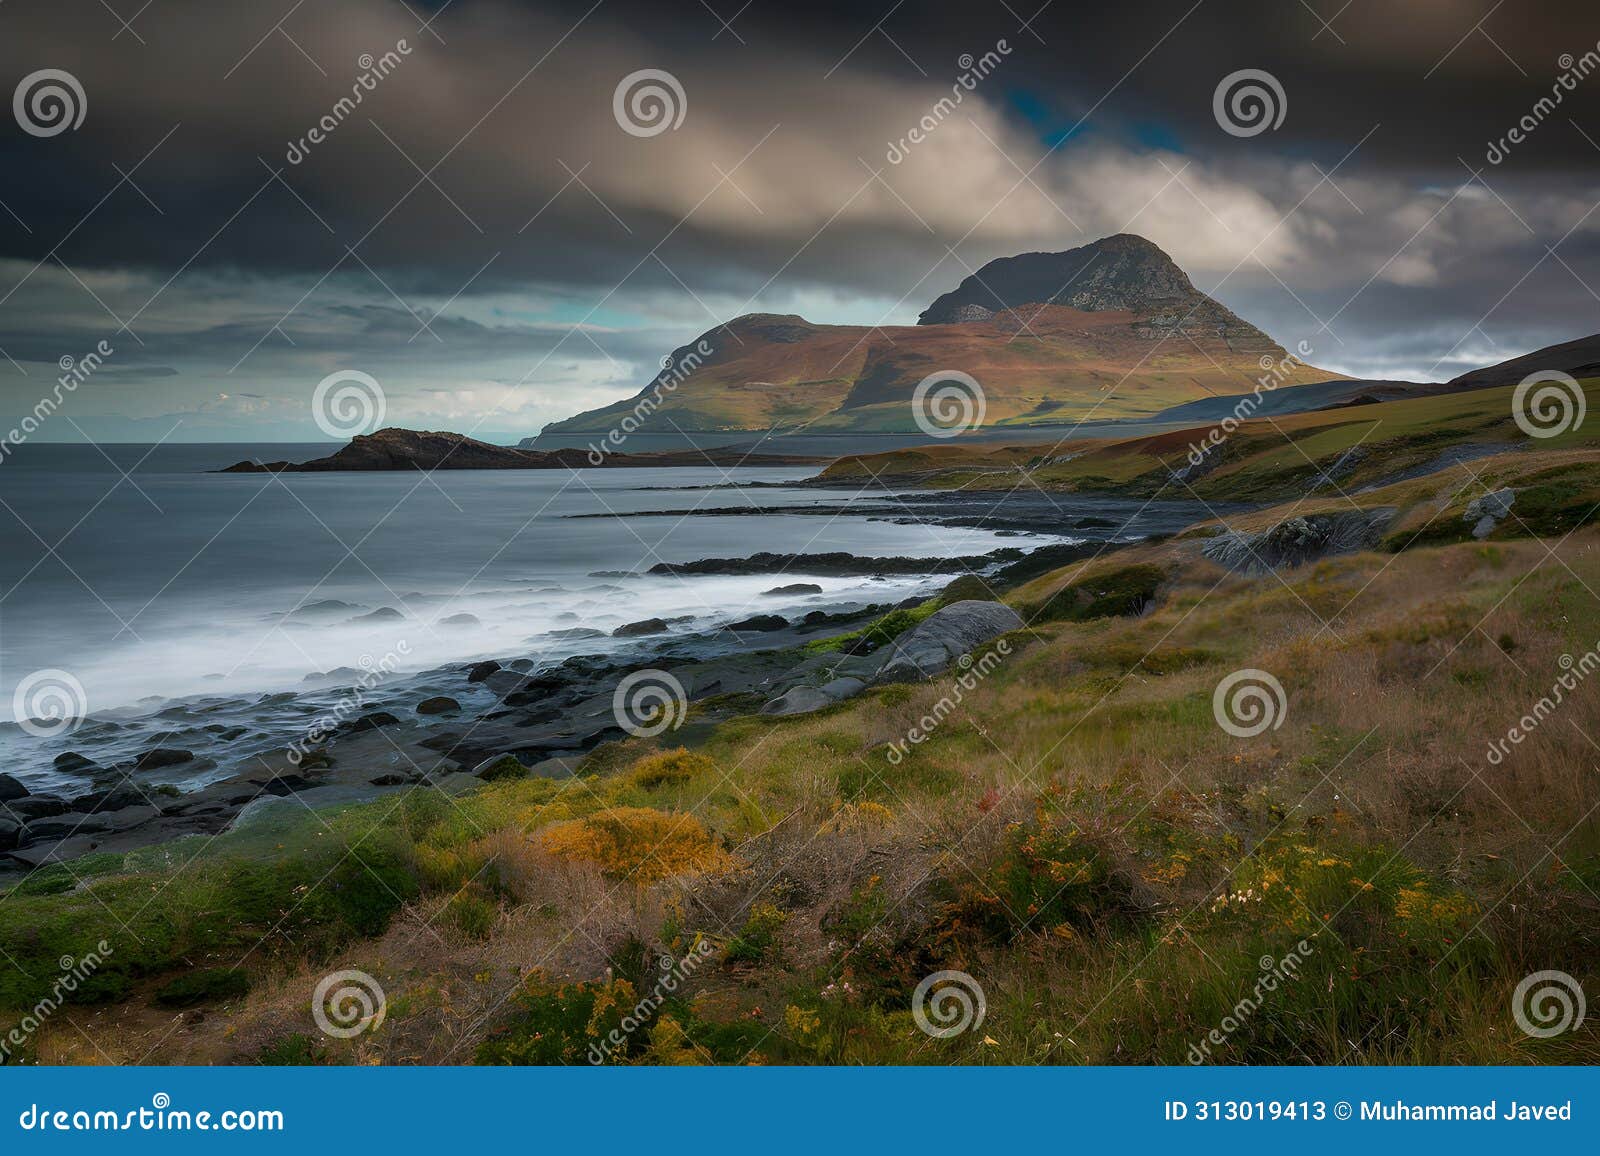 scotlands landscapes captivate with seascapes in fine art form